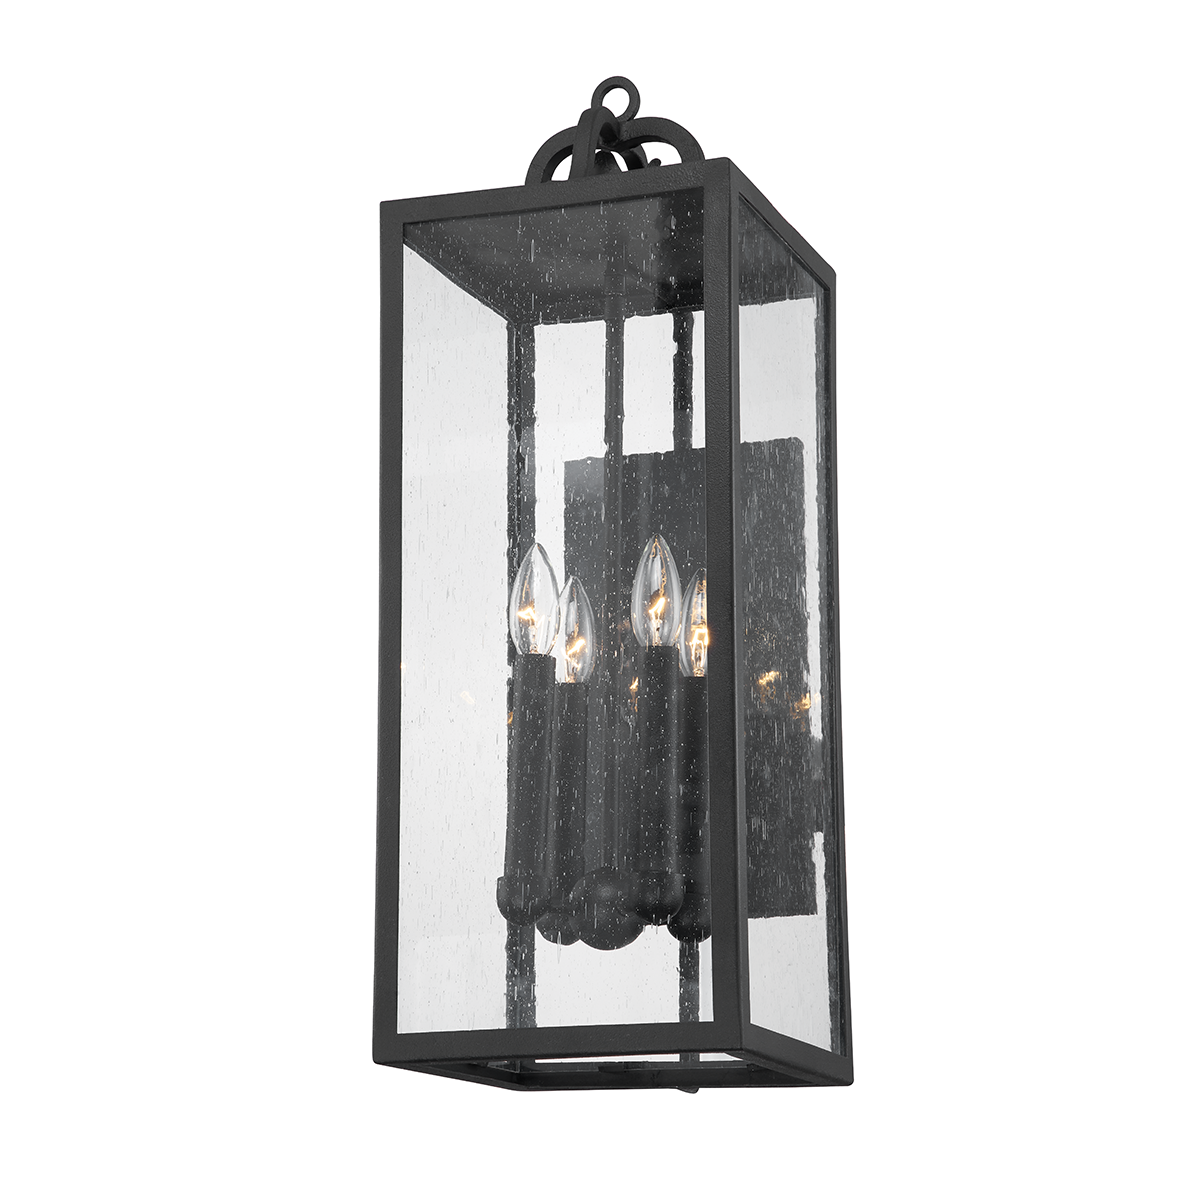 Troy Lighting 4 LIGHT EXTERIOR WALL SCONCE B2063 Outdoor l Wall Troy Lighting FORGED IRON  